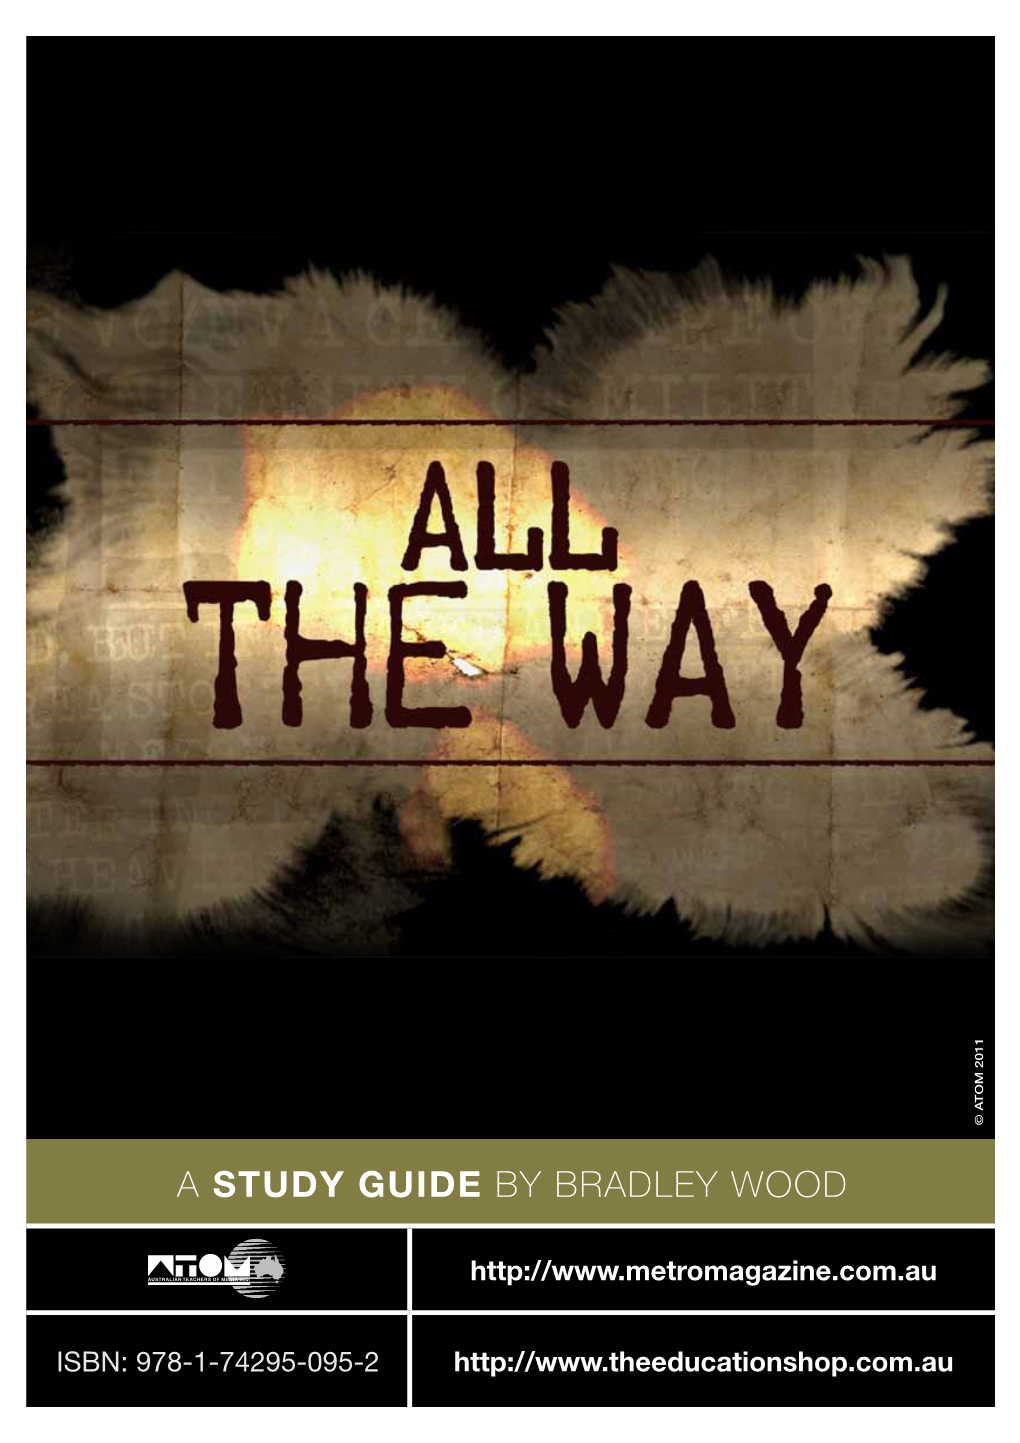 A Study Guide by Bradley Wood